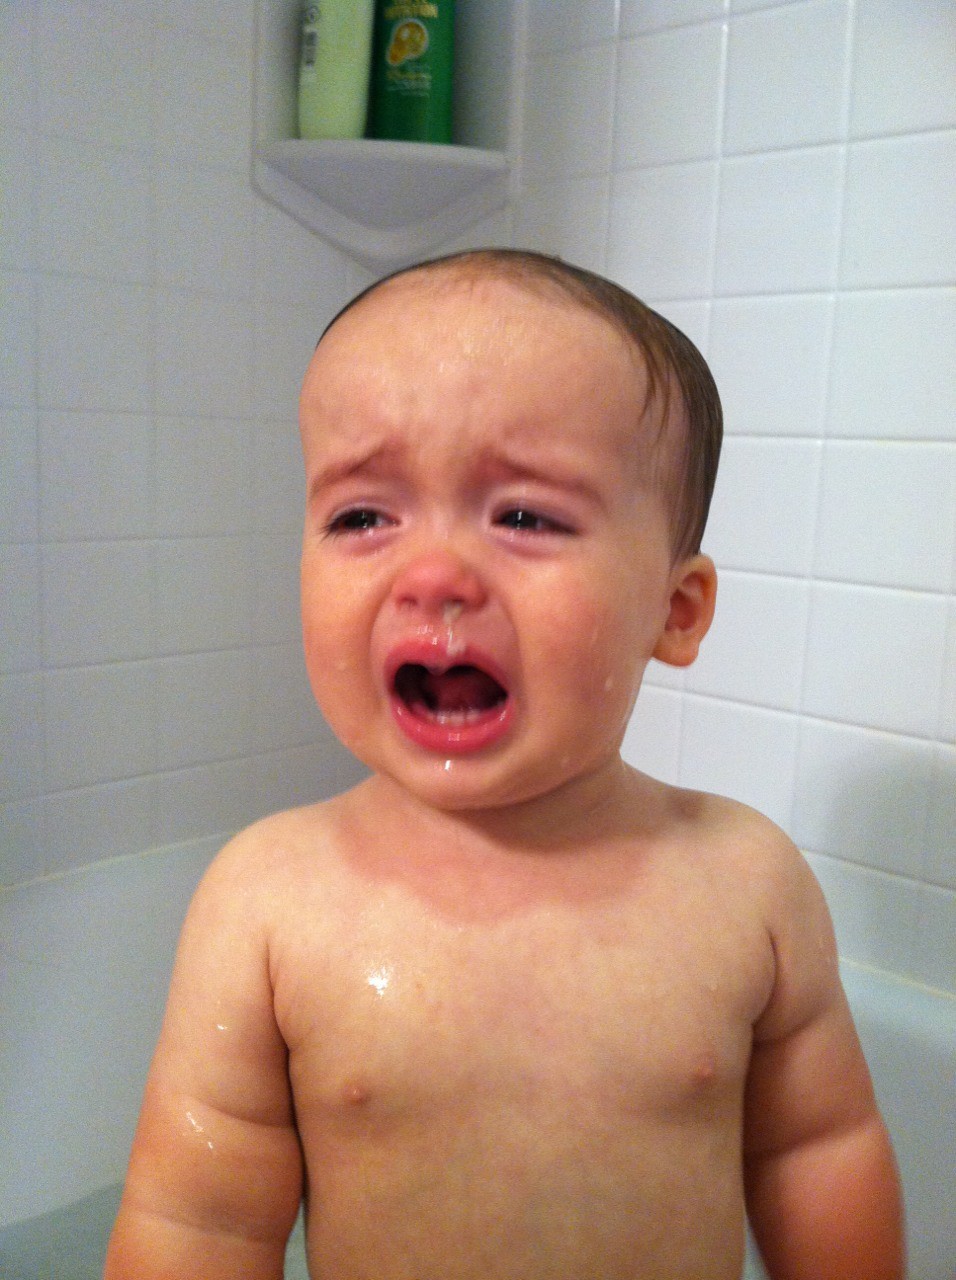 Reasons My Son Is Crying Tumblr Is Hilarious Documentation Of Toddler's  Tantrums (PHOTOS) (UPDATED) | HuffPost Life